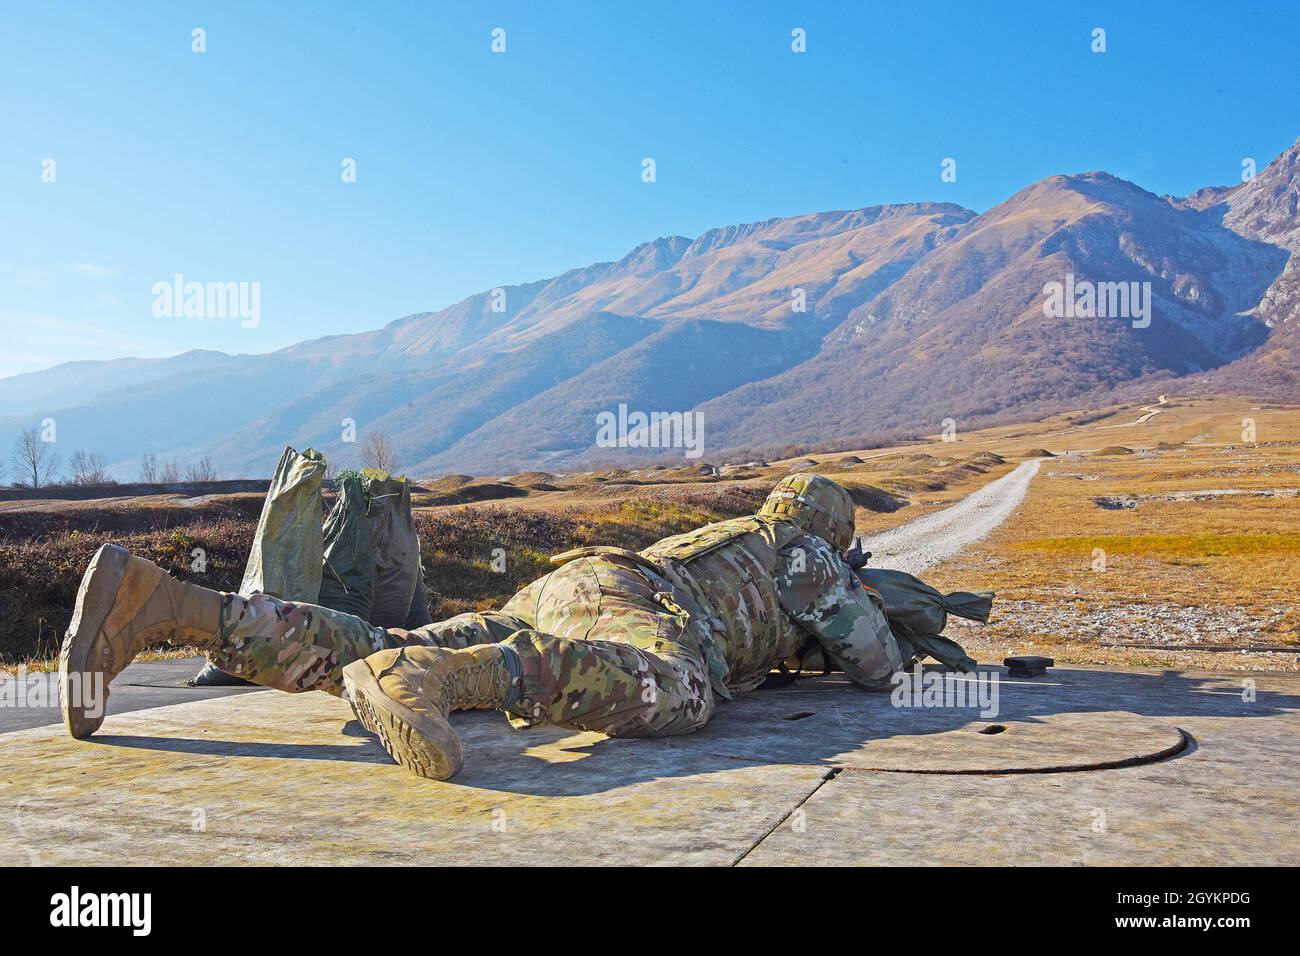 A U.S. Army Paratrooper assigned to the 173rd Airborne Brigade engages targets with an M4 carbine in prone position during weapons qualification at Cao Malnisio Range, Pordenone, Italy, Jan. 22, 2020. The 173rd Airborne Brigade is the U.S. Army Contingency Response Force in Europe, capable of projecting ready forces anywhere in the U.S. European, Africa or Central Commands' areas of responsibility. (U.S. Army photo by Paolo Bovo) Stock Photo